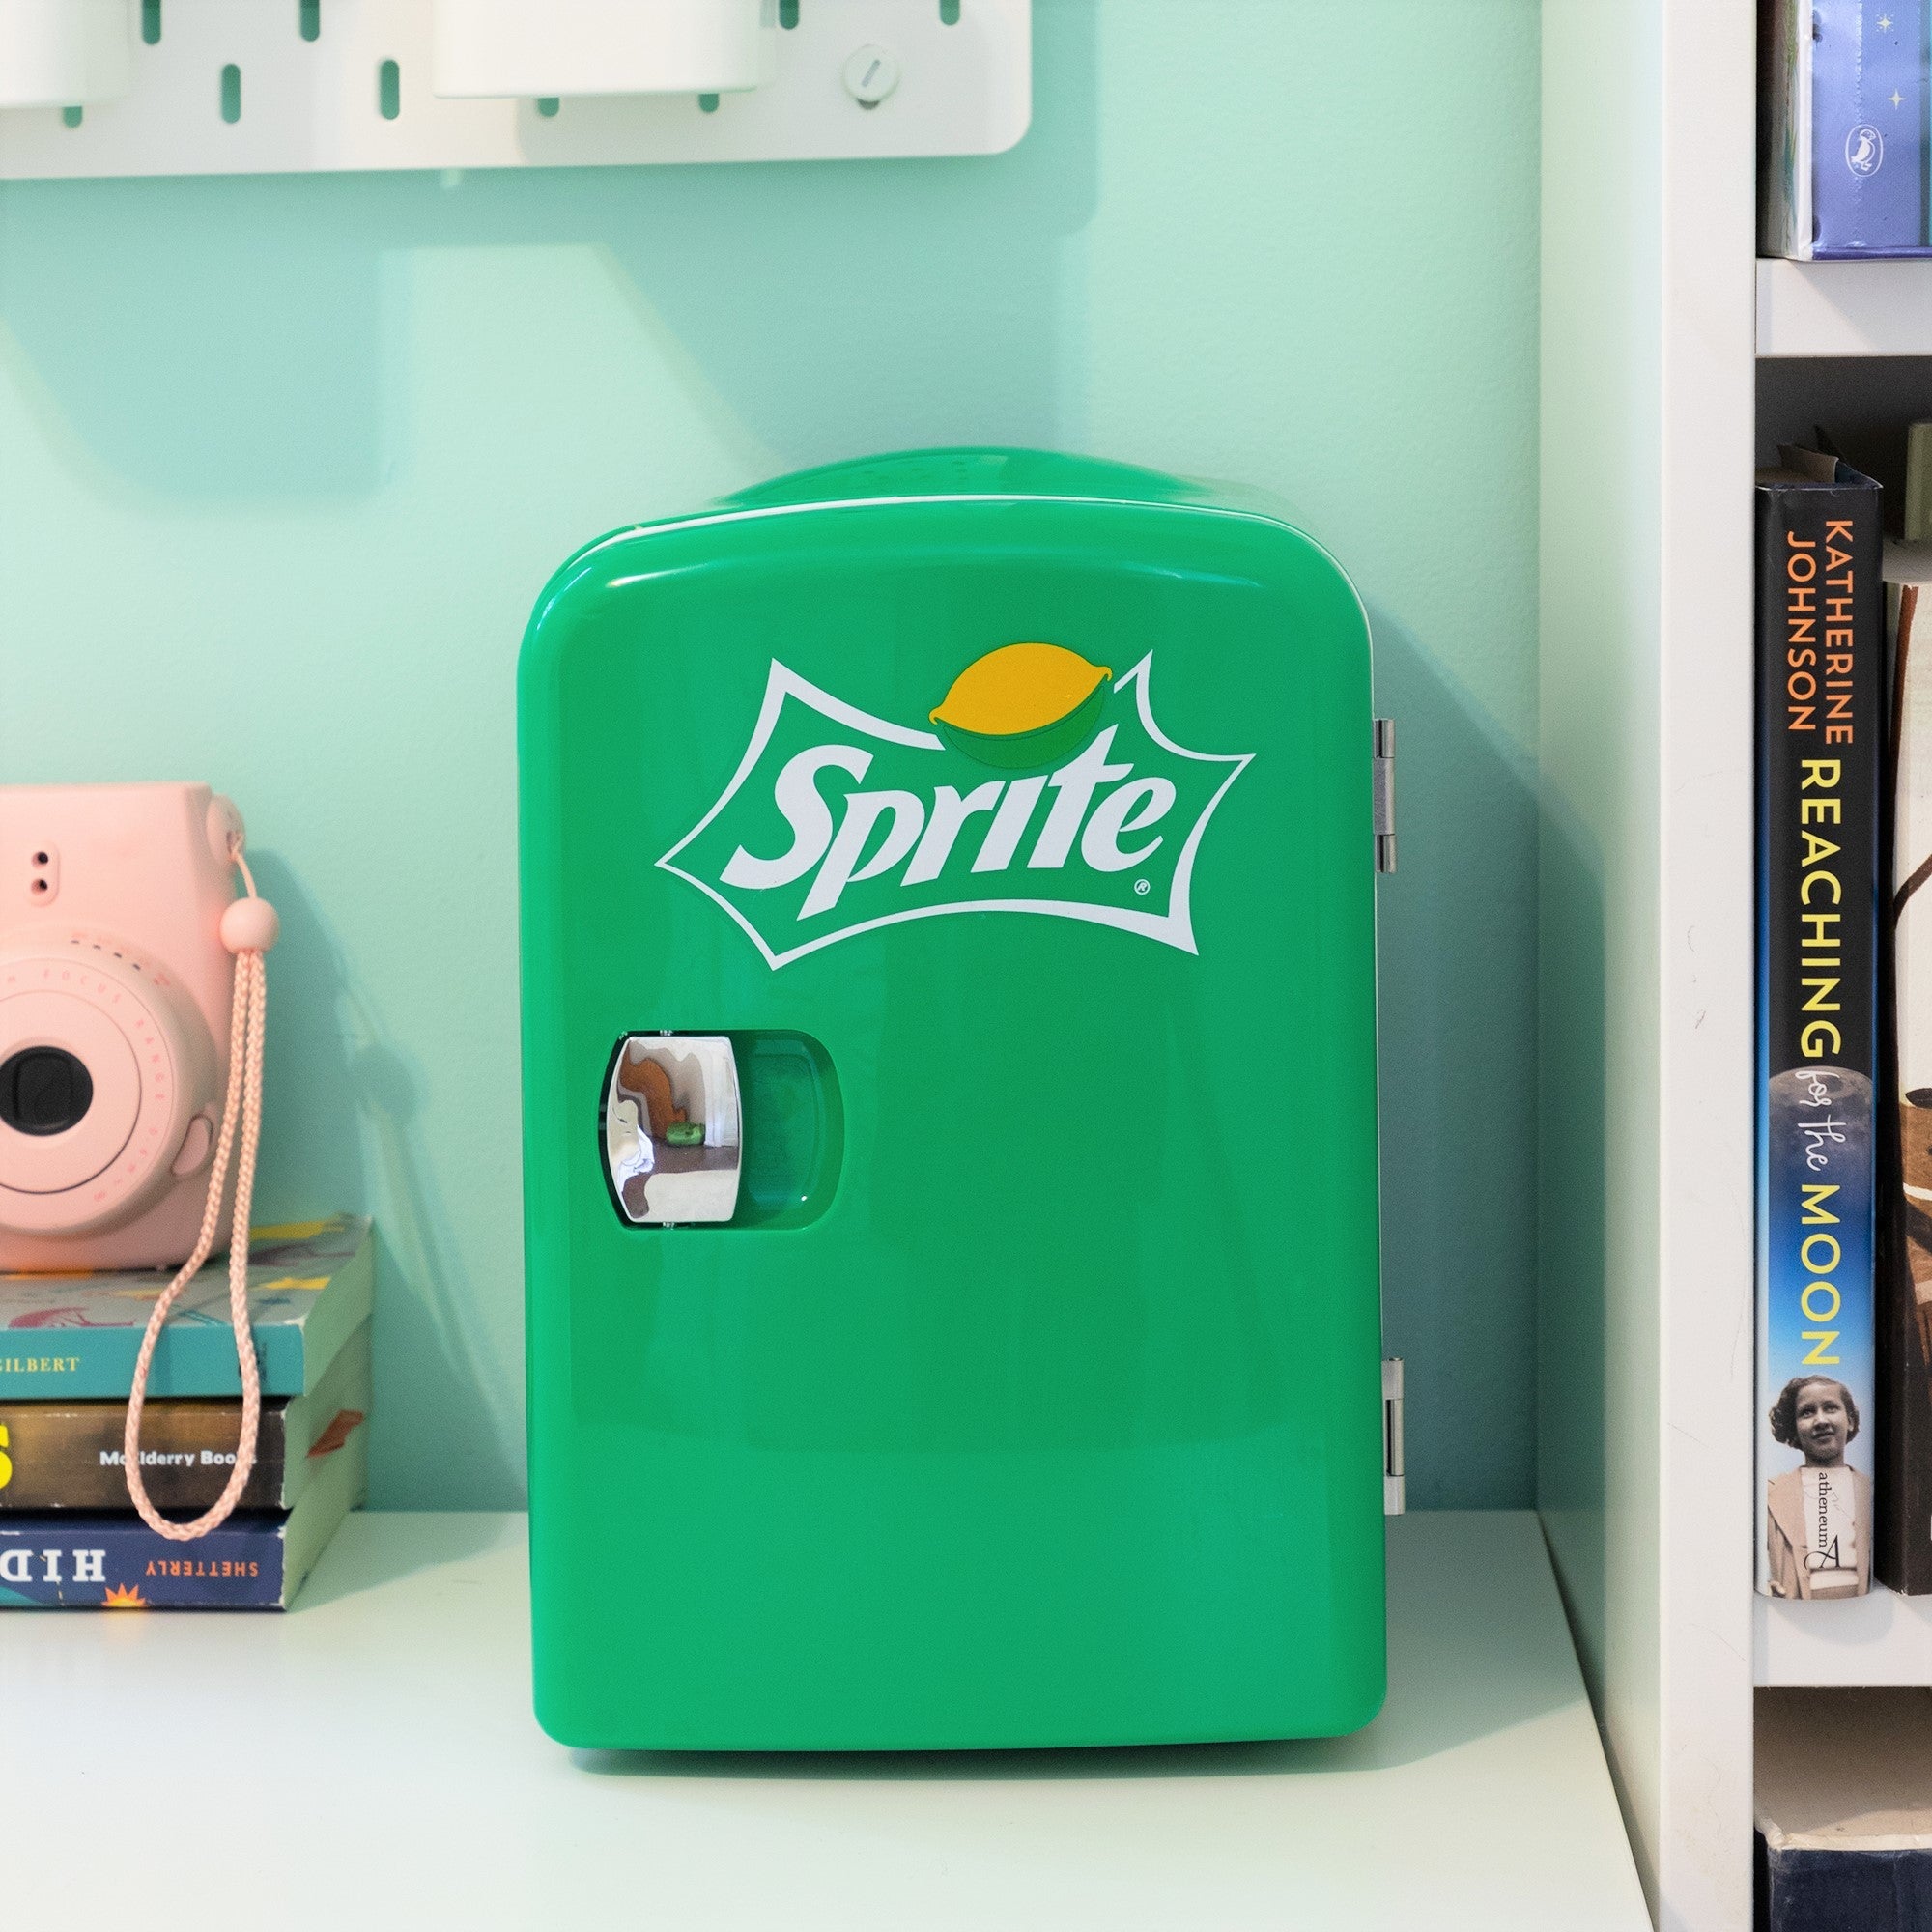 Lifestyle image of Coca-Cola Sprite 6 can mini fridge, closed, on a white desktop with an aqua wall behind. There is a stack of books and a pink camera to the left of the fridge and a bookshelf to the right